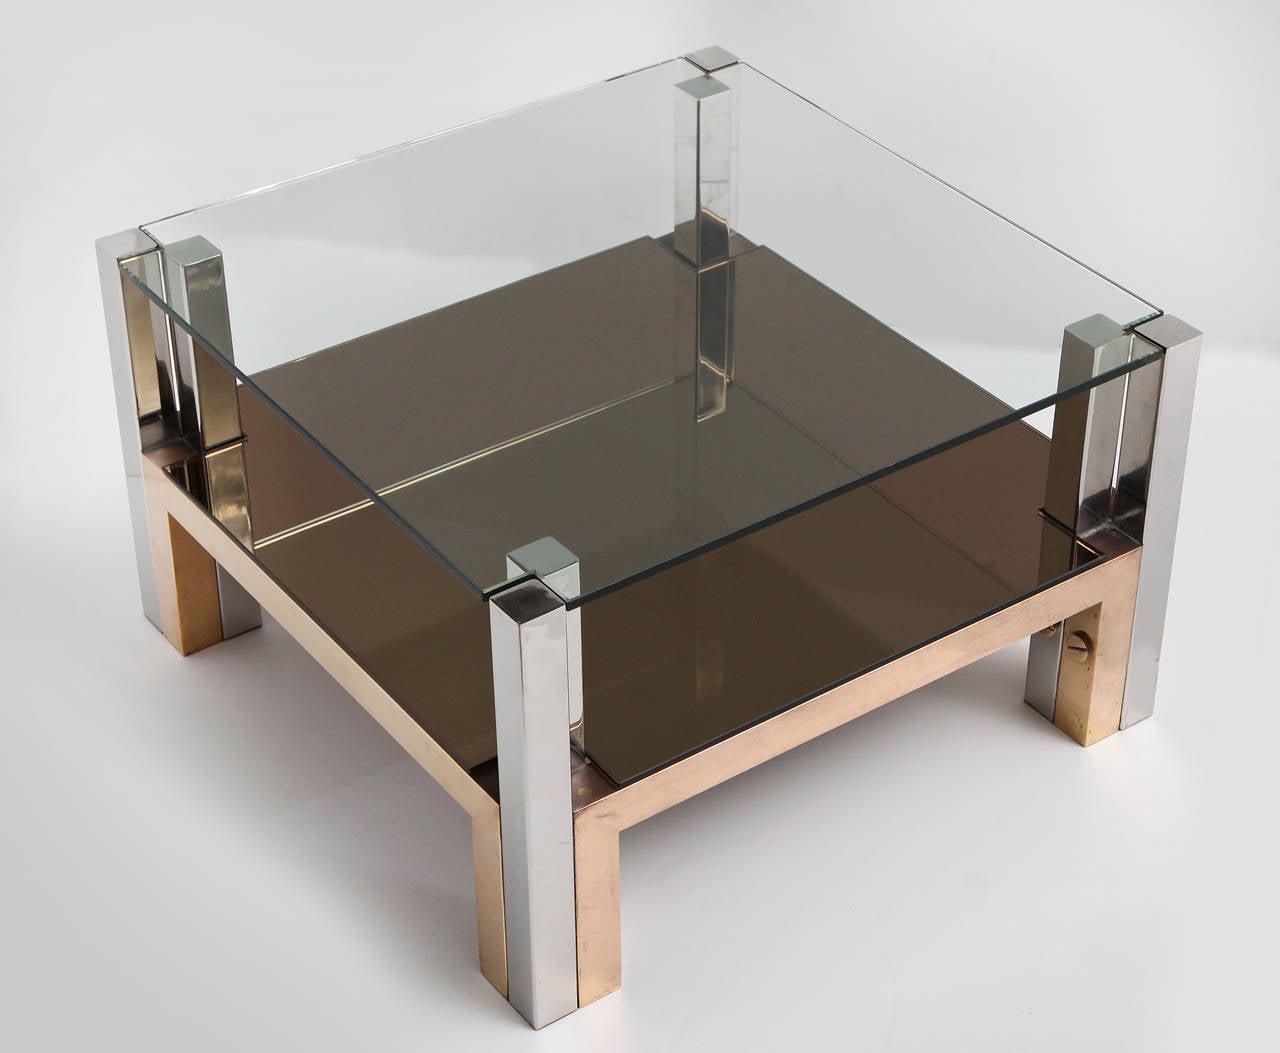 Other Pair of Chrome and Glass Coffee Tables by Nucci Valsecchi